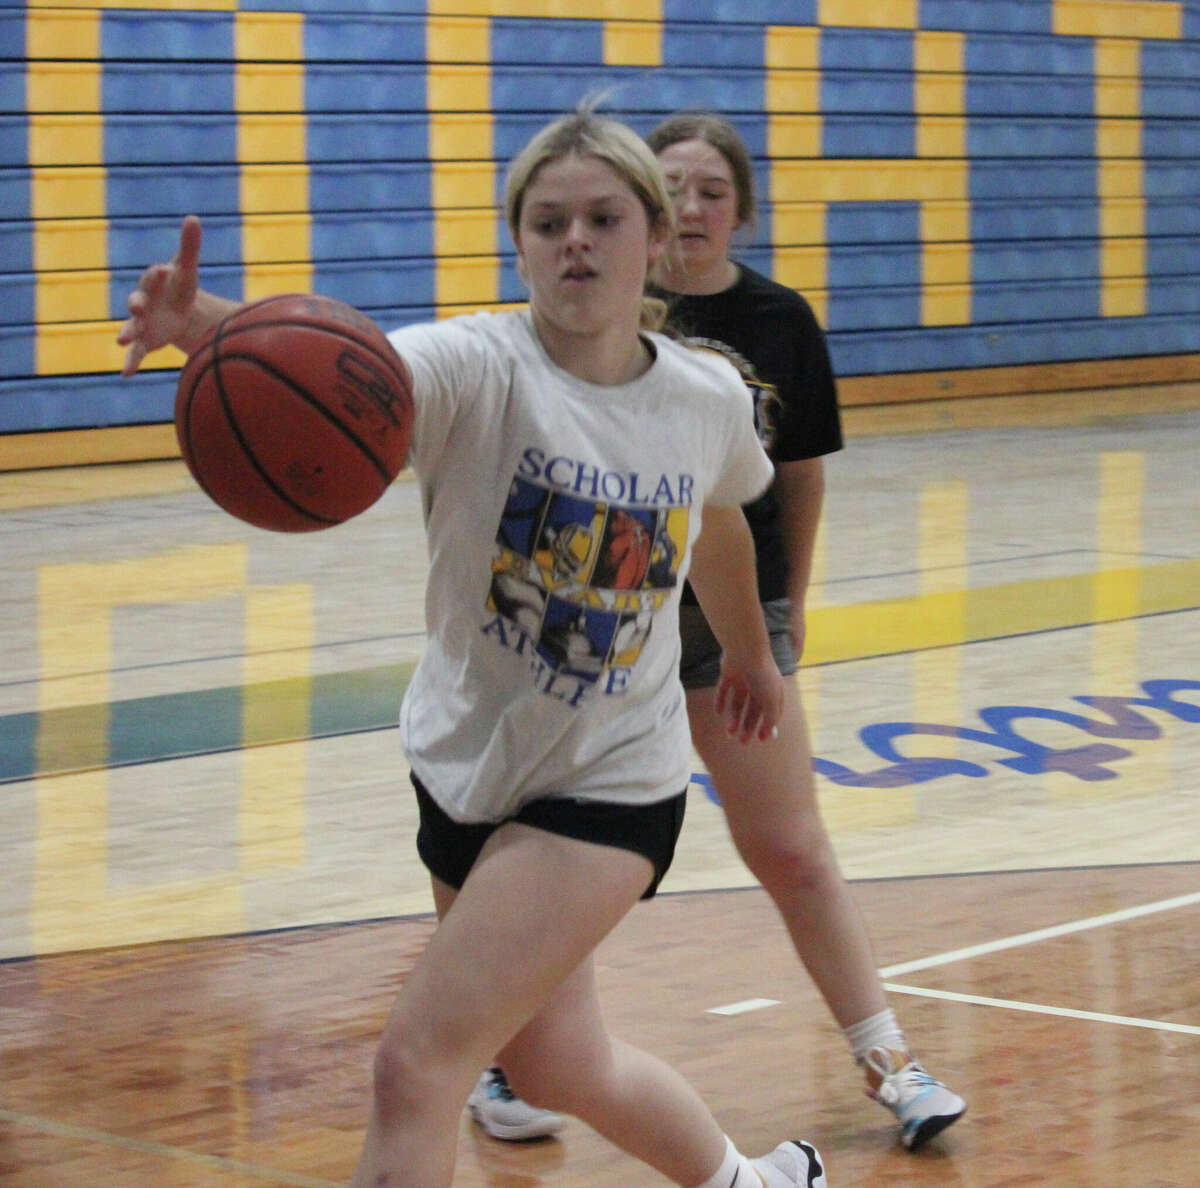 Evart's Ally Theunick goes for the ball during a preseason Wildcat practice.